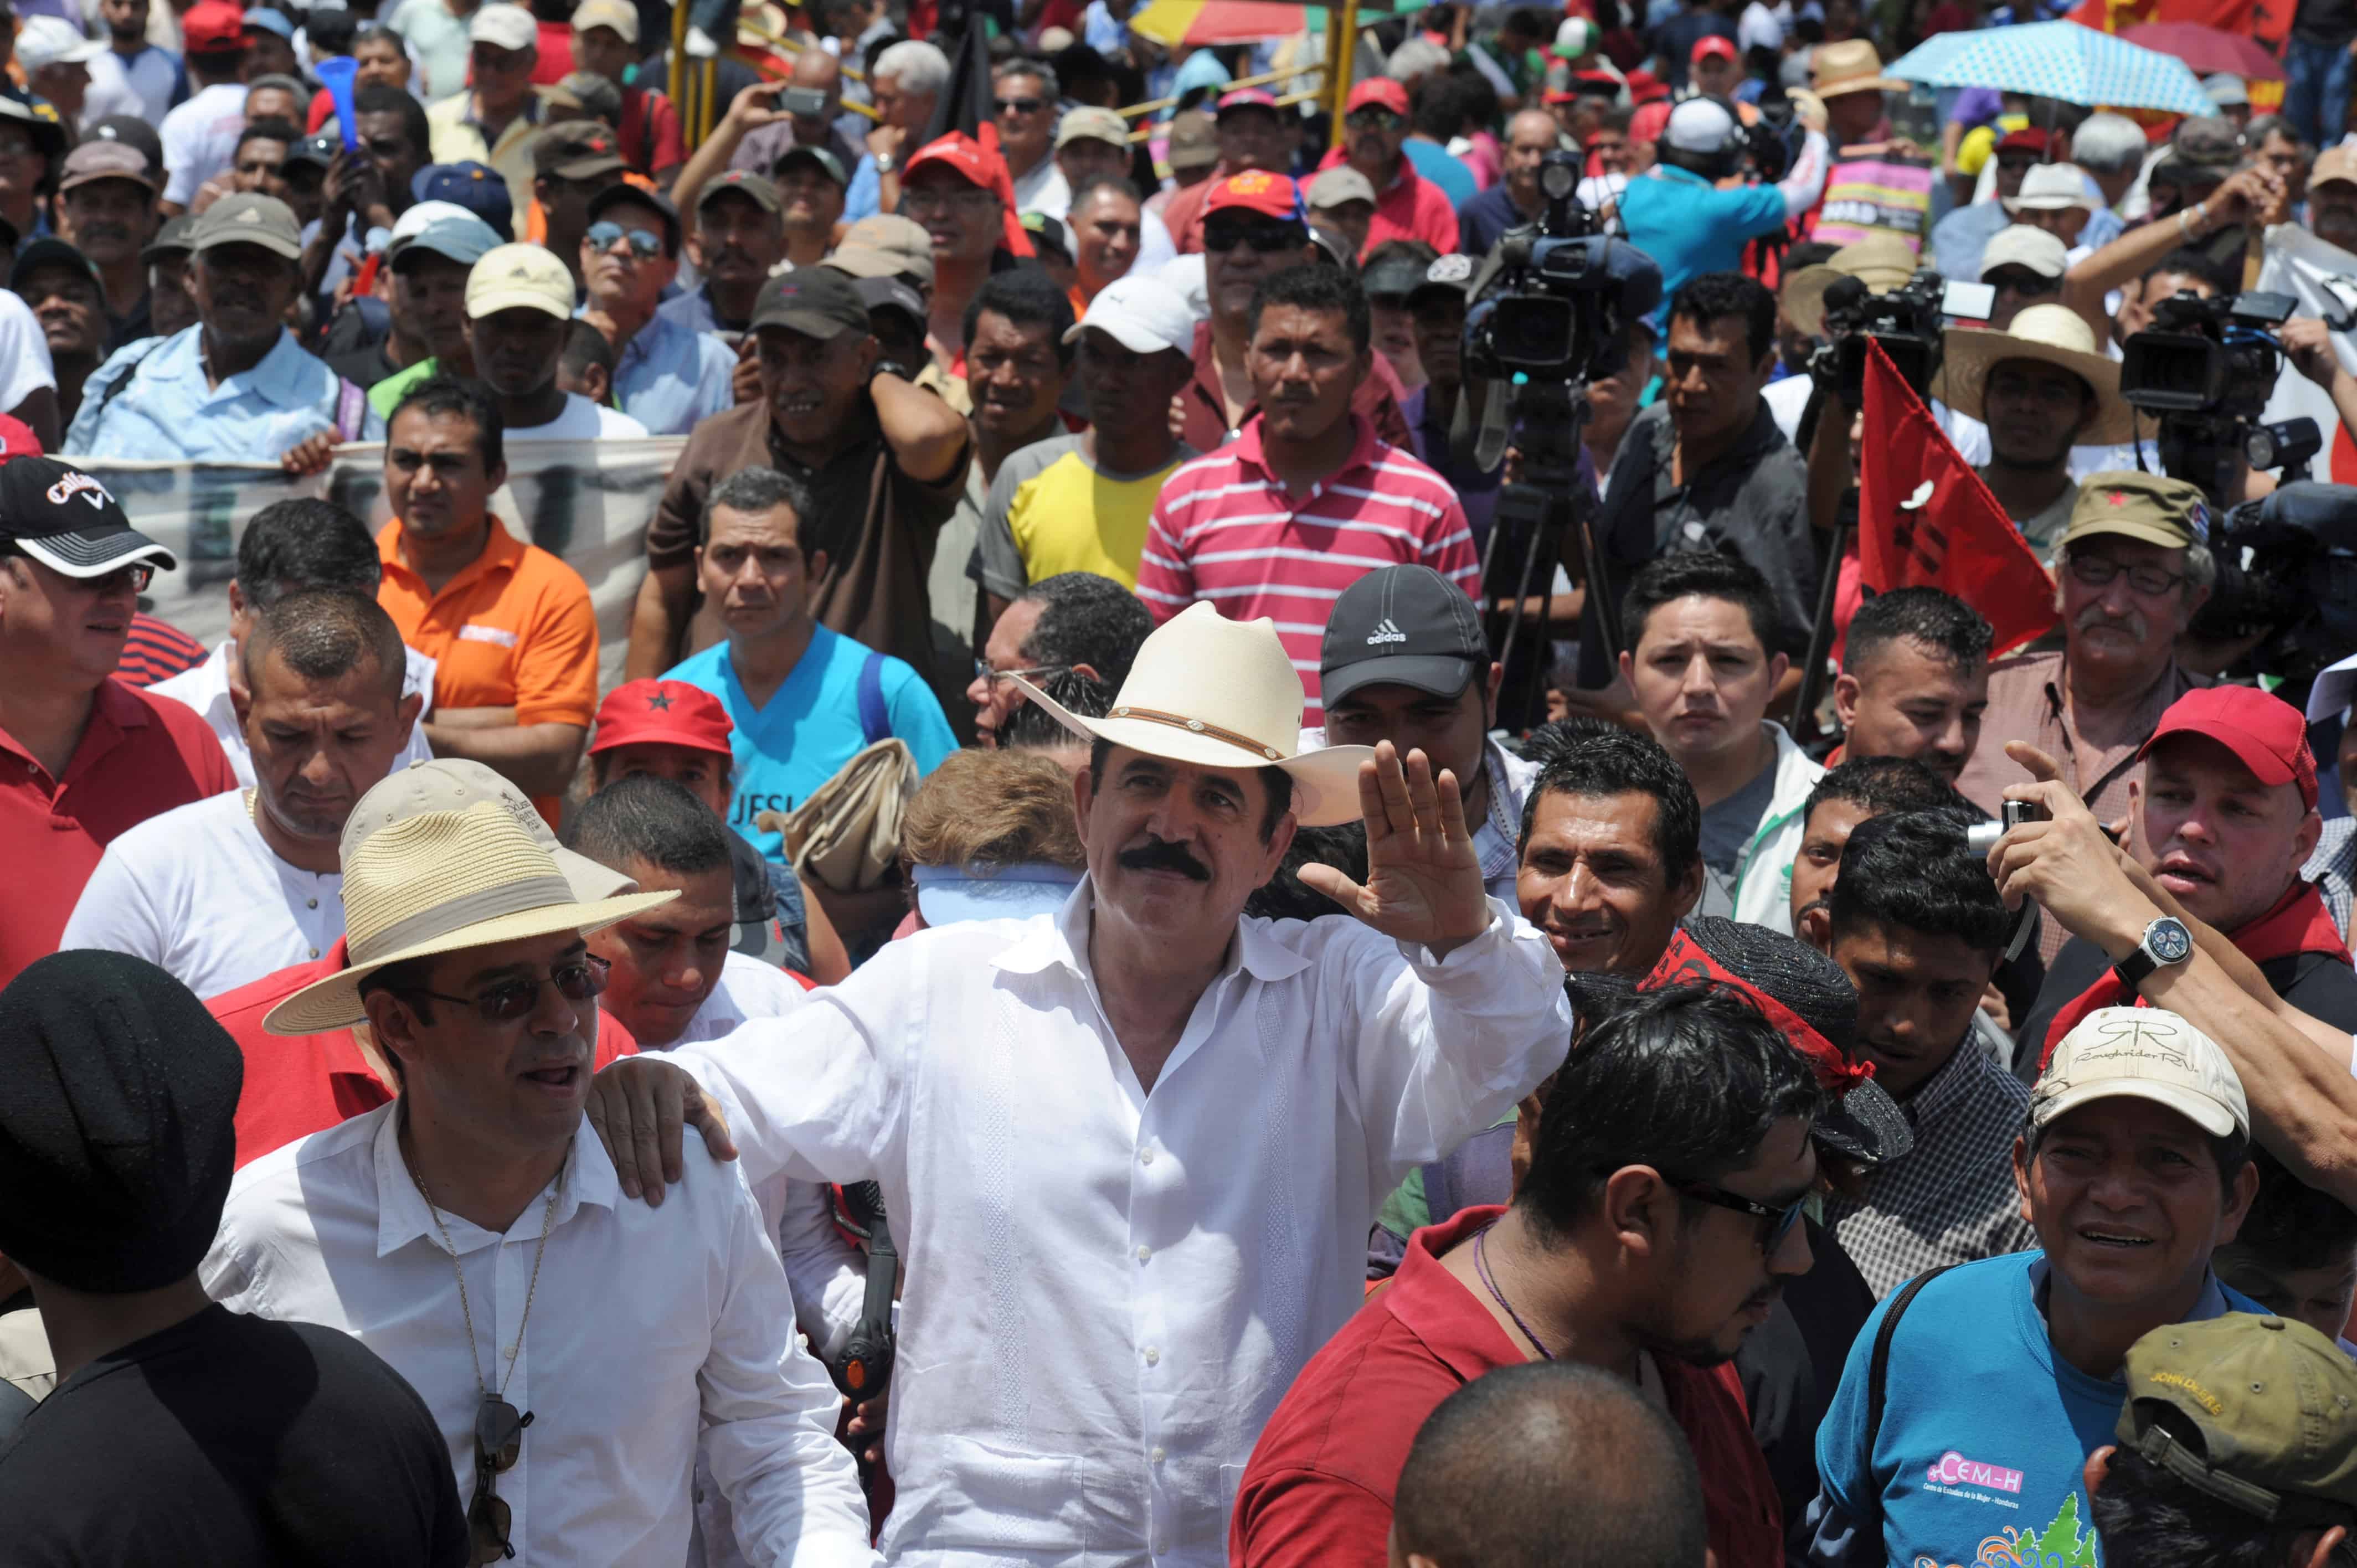 Former Honduran President Manuel Zelaya (center) participates in the May Day march in Tegucigalpa on May 1, 2015.